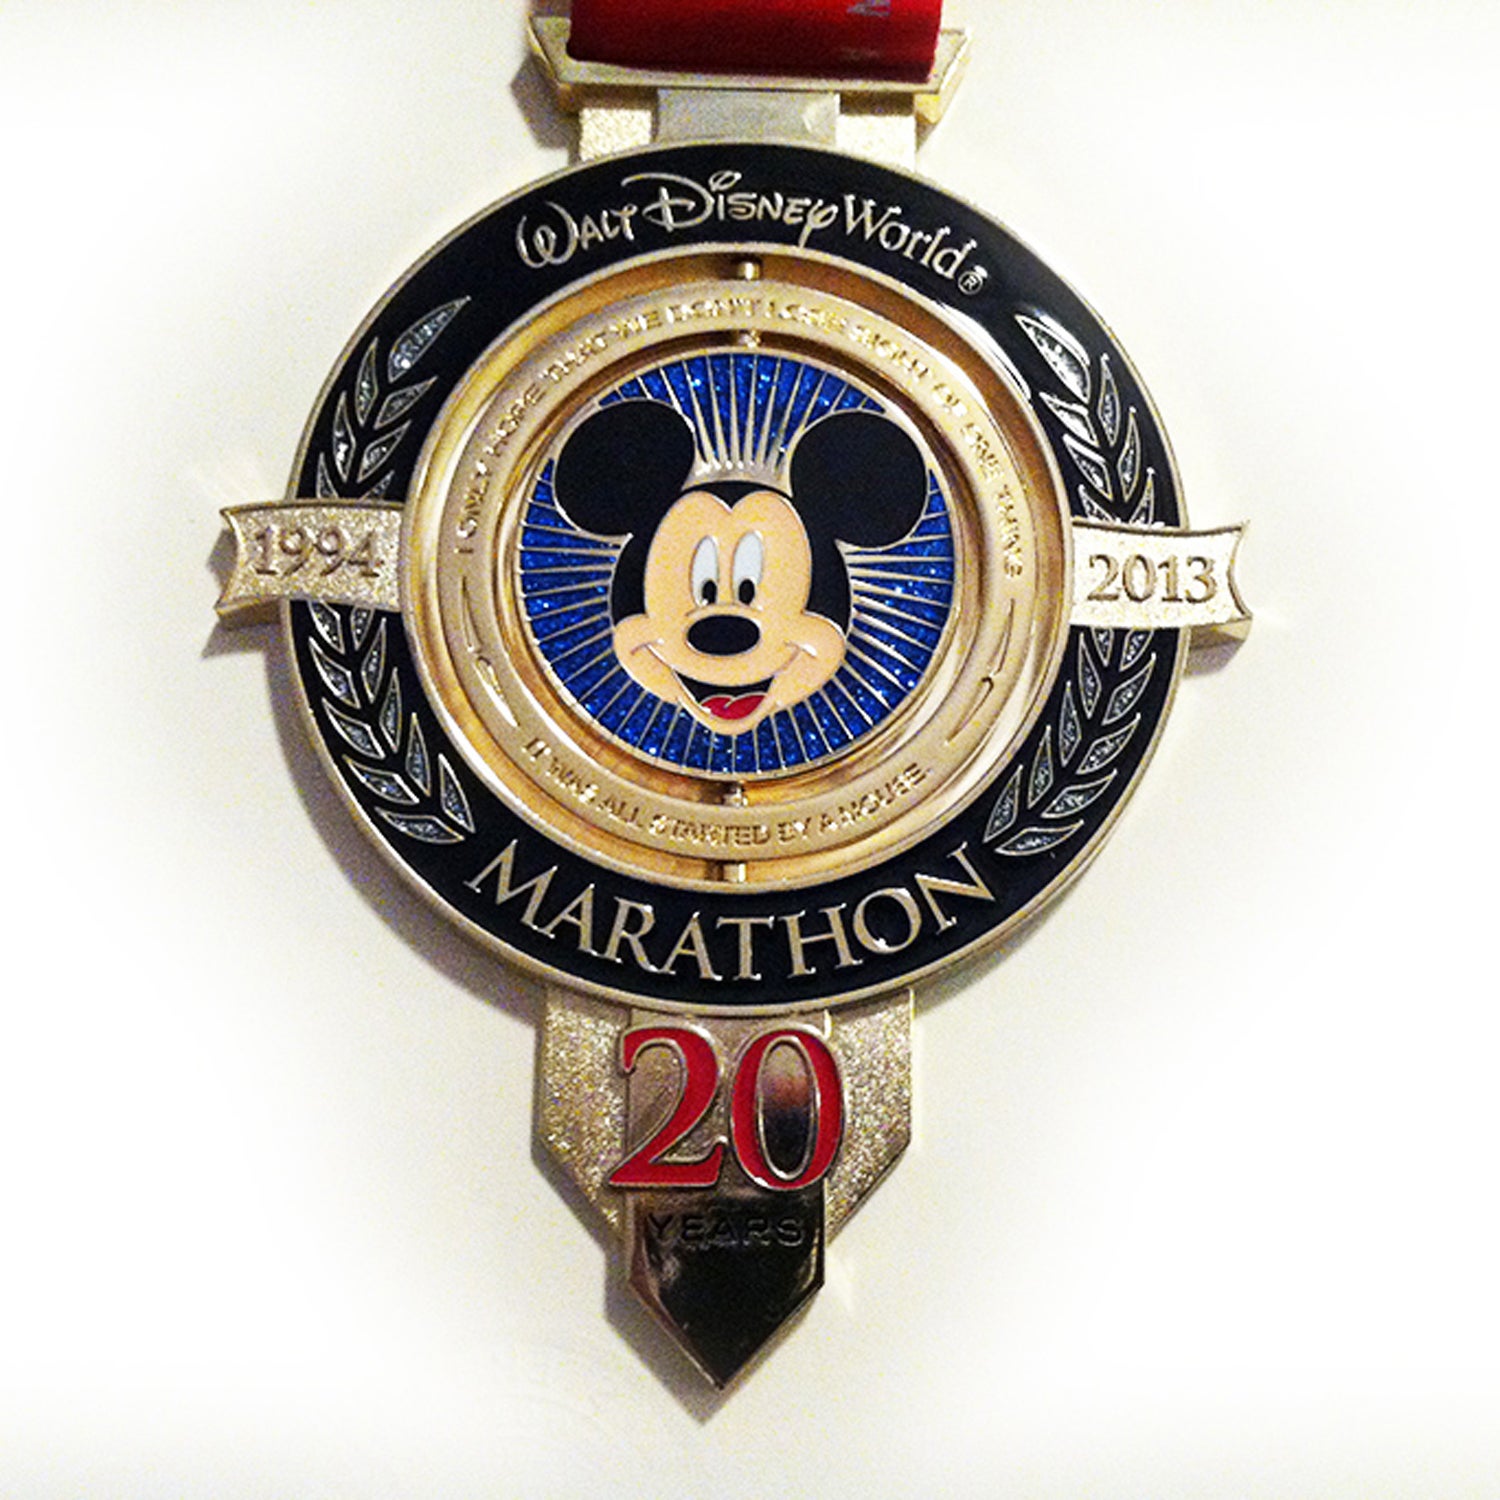 Solera: With these races’ exorbitant price tags, you can bet that Disney will invest in top-notch hardware. The 20th anniversary of their biggest running event delivered with a regal, heavy, and incredibly elegant medal. The center spins with Mickey Mouse’s modern incarnation on one side and his original Steamboat Willie version on the other.